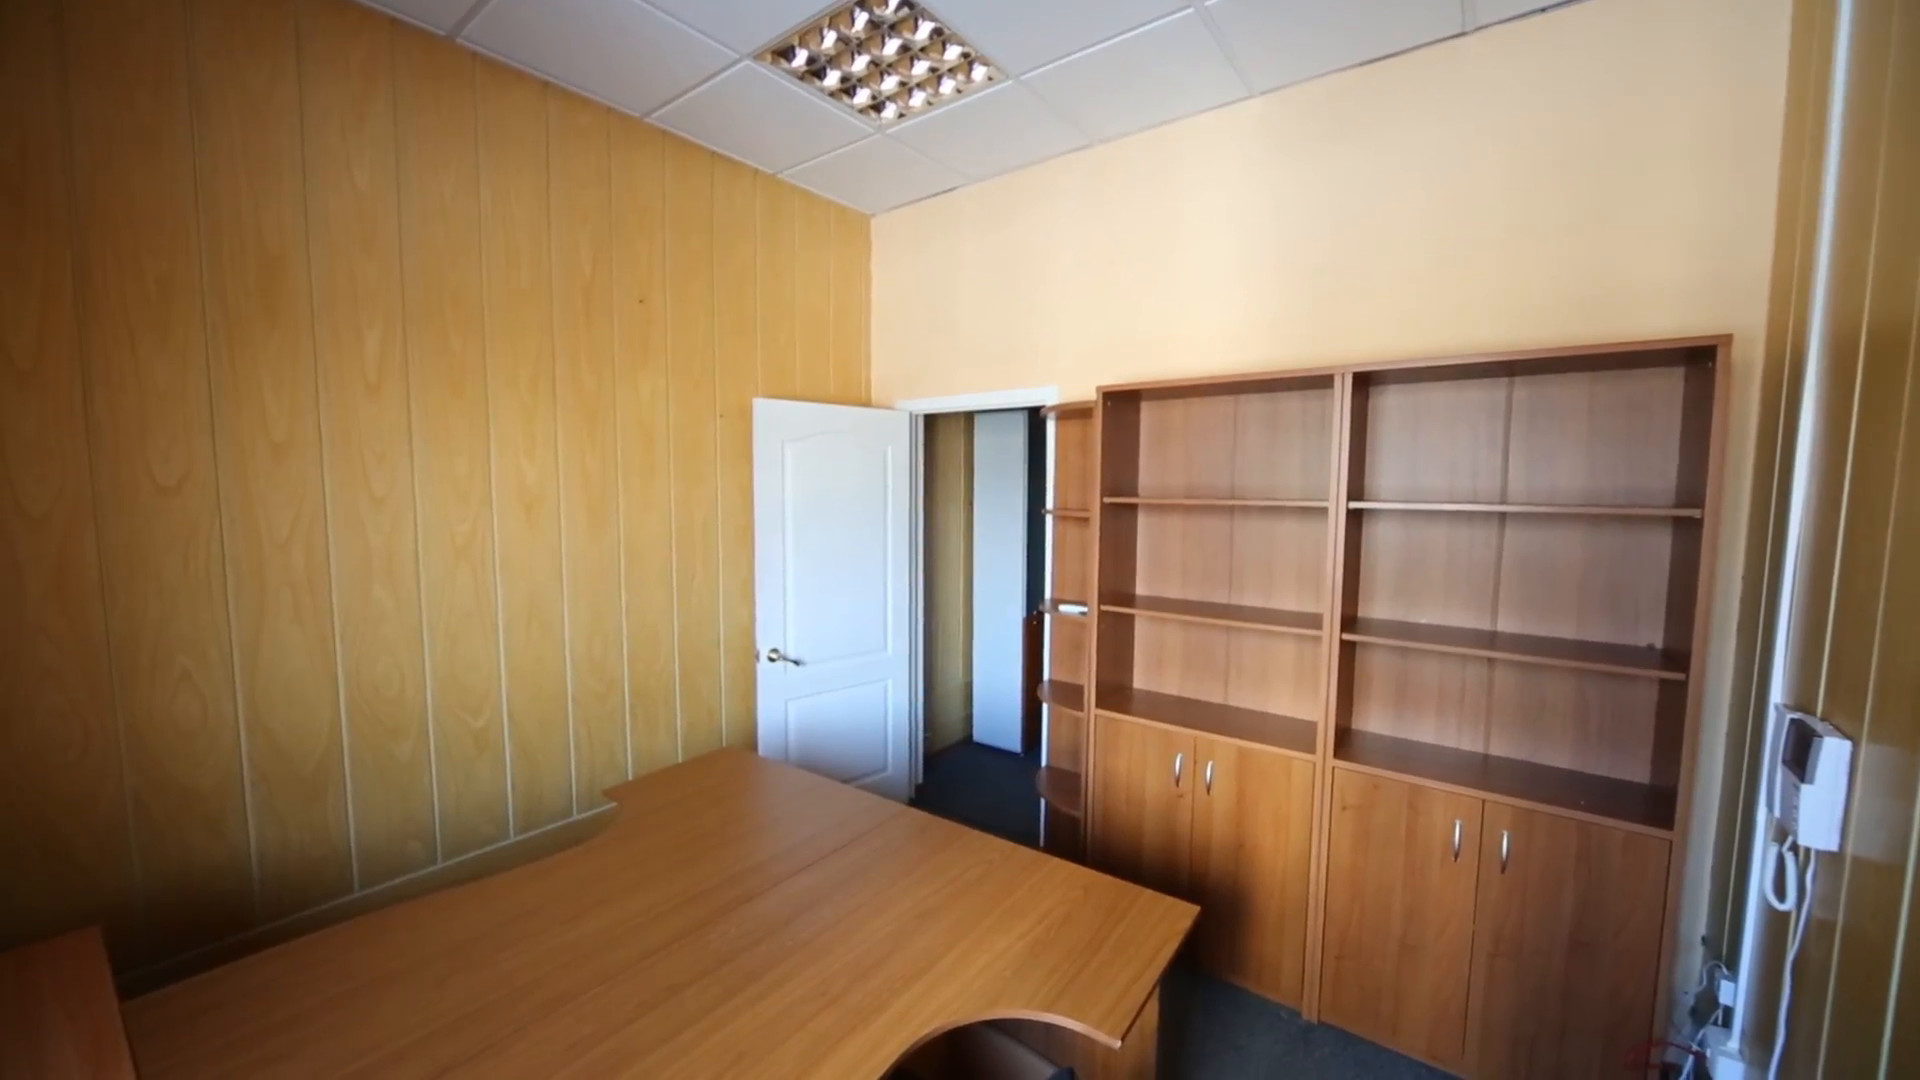 1920x1080 A small office room with a work desk and empty cabinets Stock Video Footage  - VideoBlocks